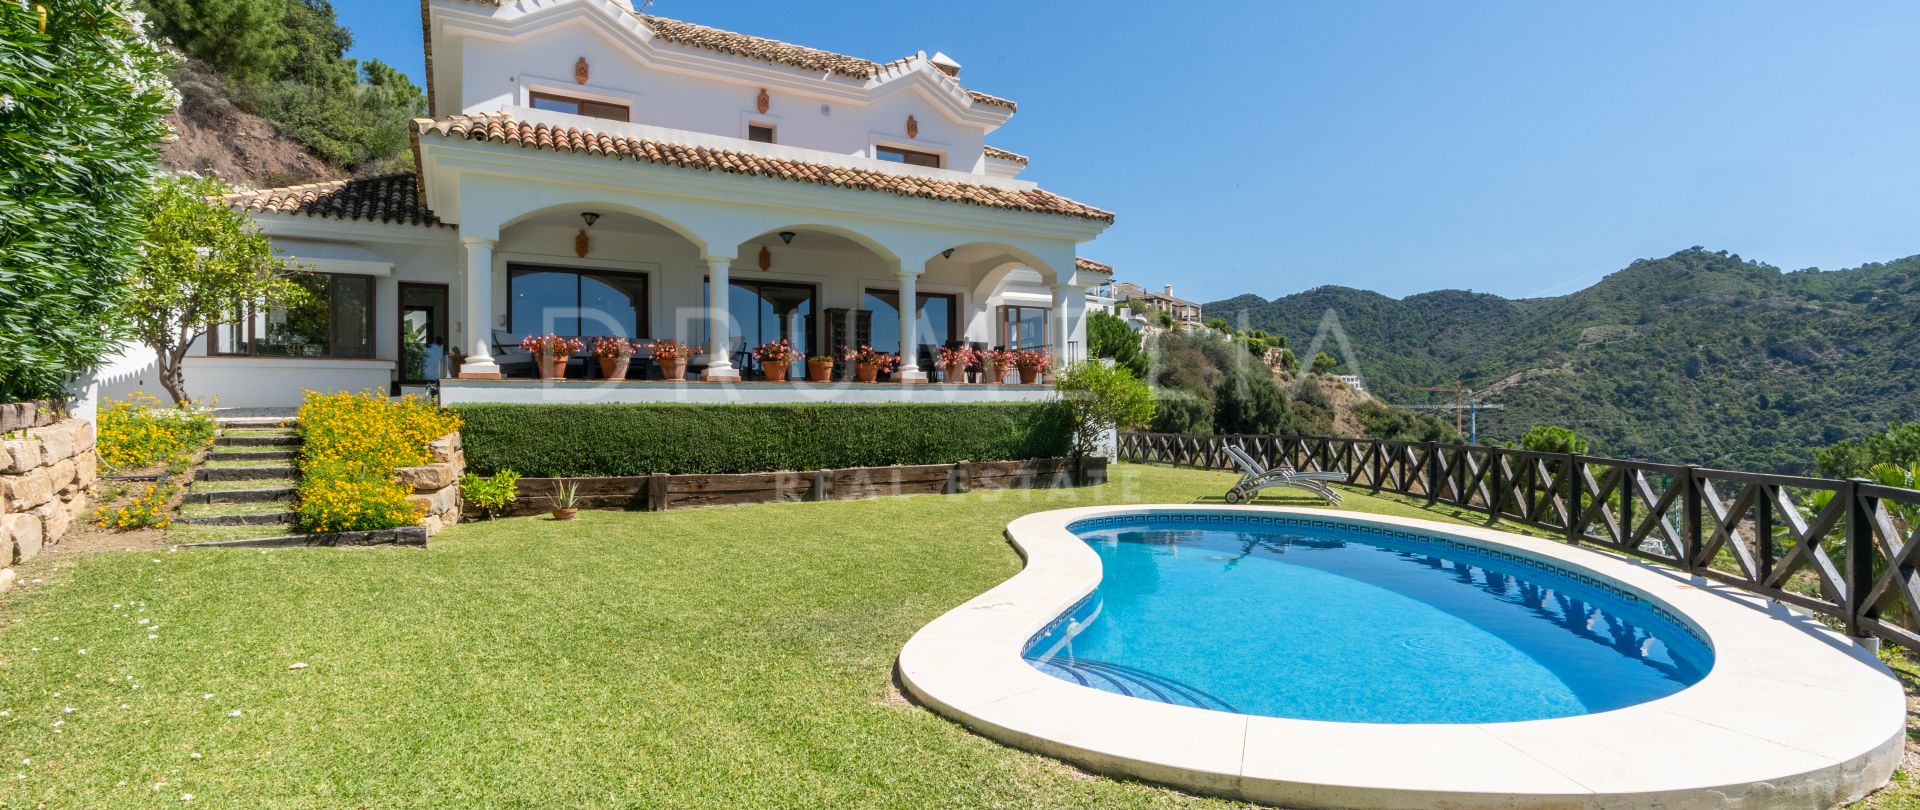 Beautiful Mediterranean-style high-end villa with sea and mountain views in Monte Mayor, Benahavís